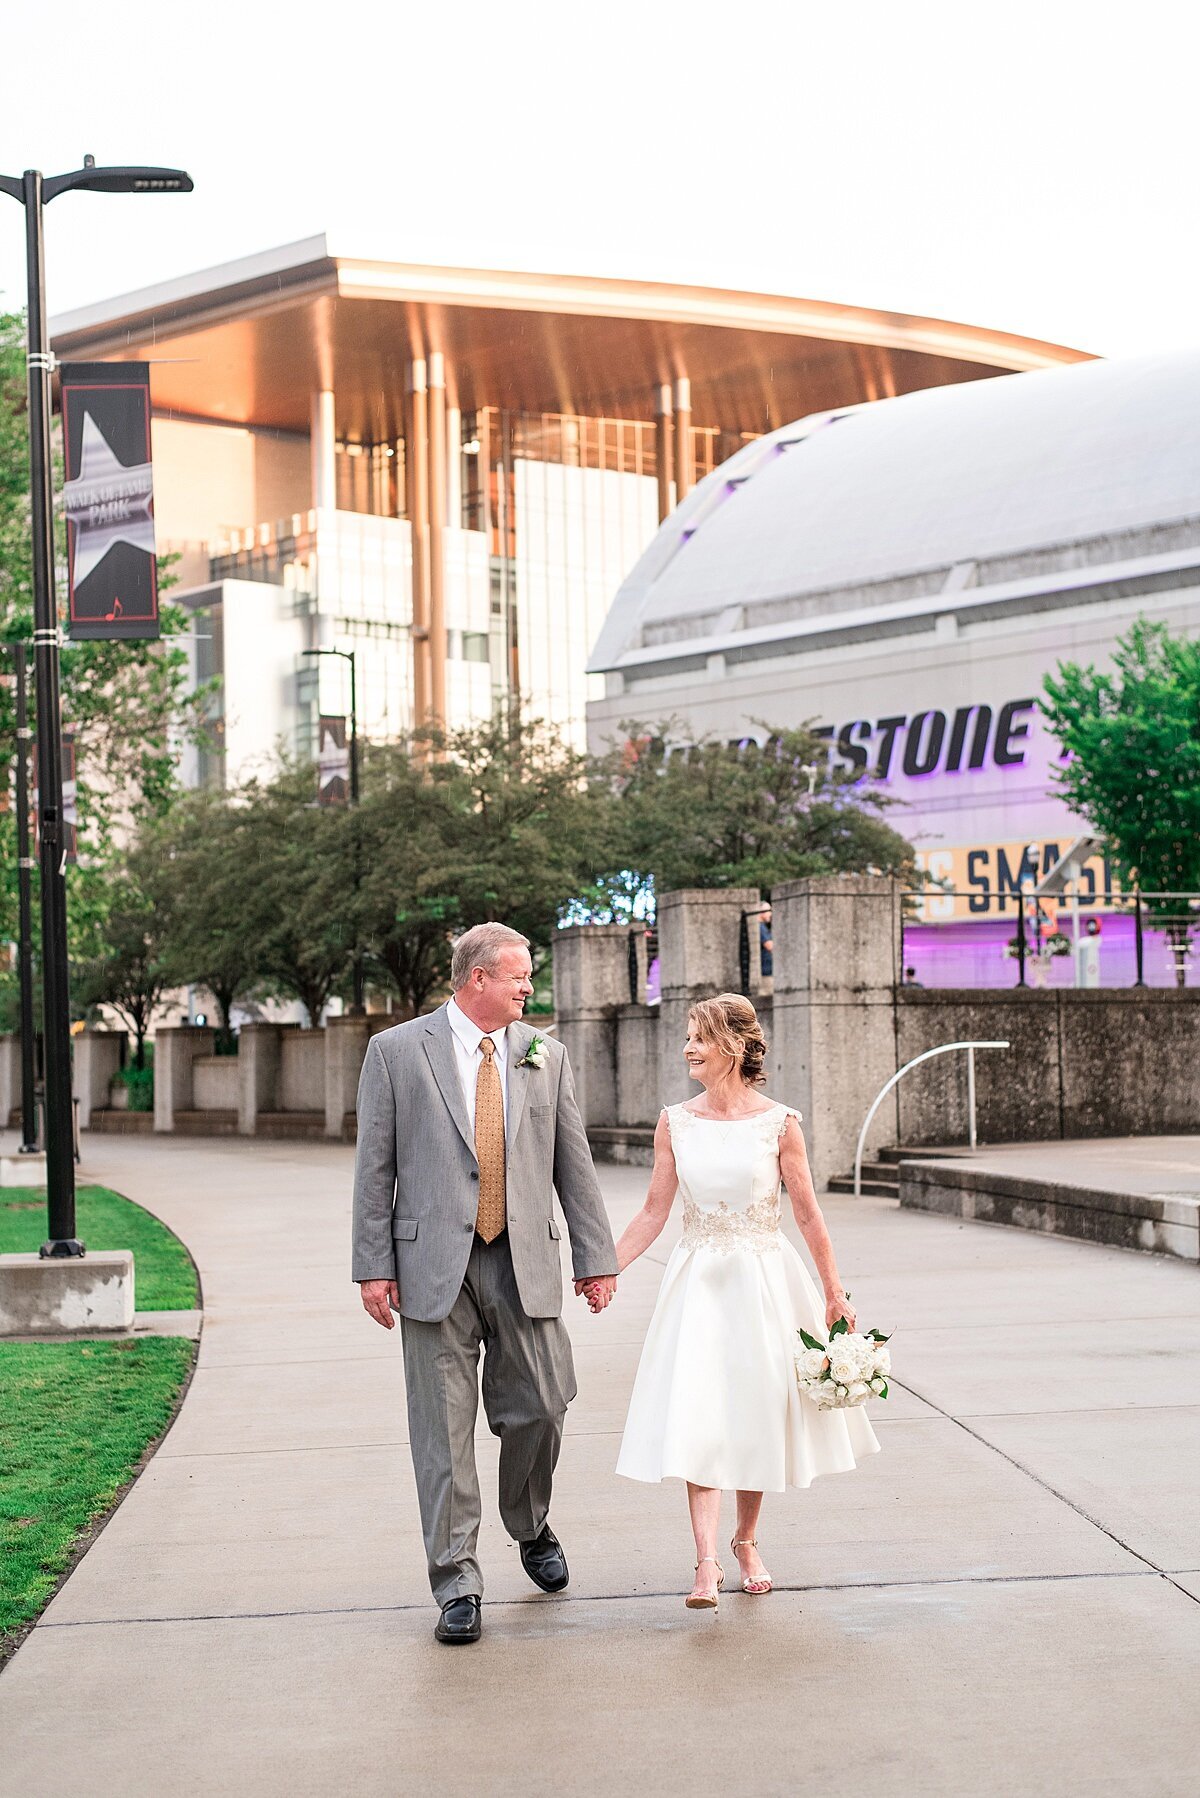 The bride and groom walk passed the Smashville sign above Bridgestone Arena were the Preds play in Nashville. They are holding hand and looking at each other. The groom is wearing a gray suit with a white shirt and pink tie. The bride is wearing a white tea length wedding dress with gold lace detail around the waist and at the shoulders. She is carrying a small white bouquet at her side.